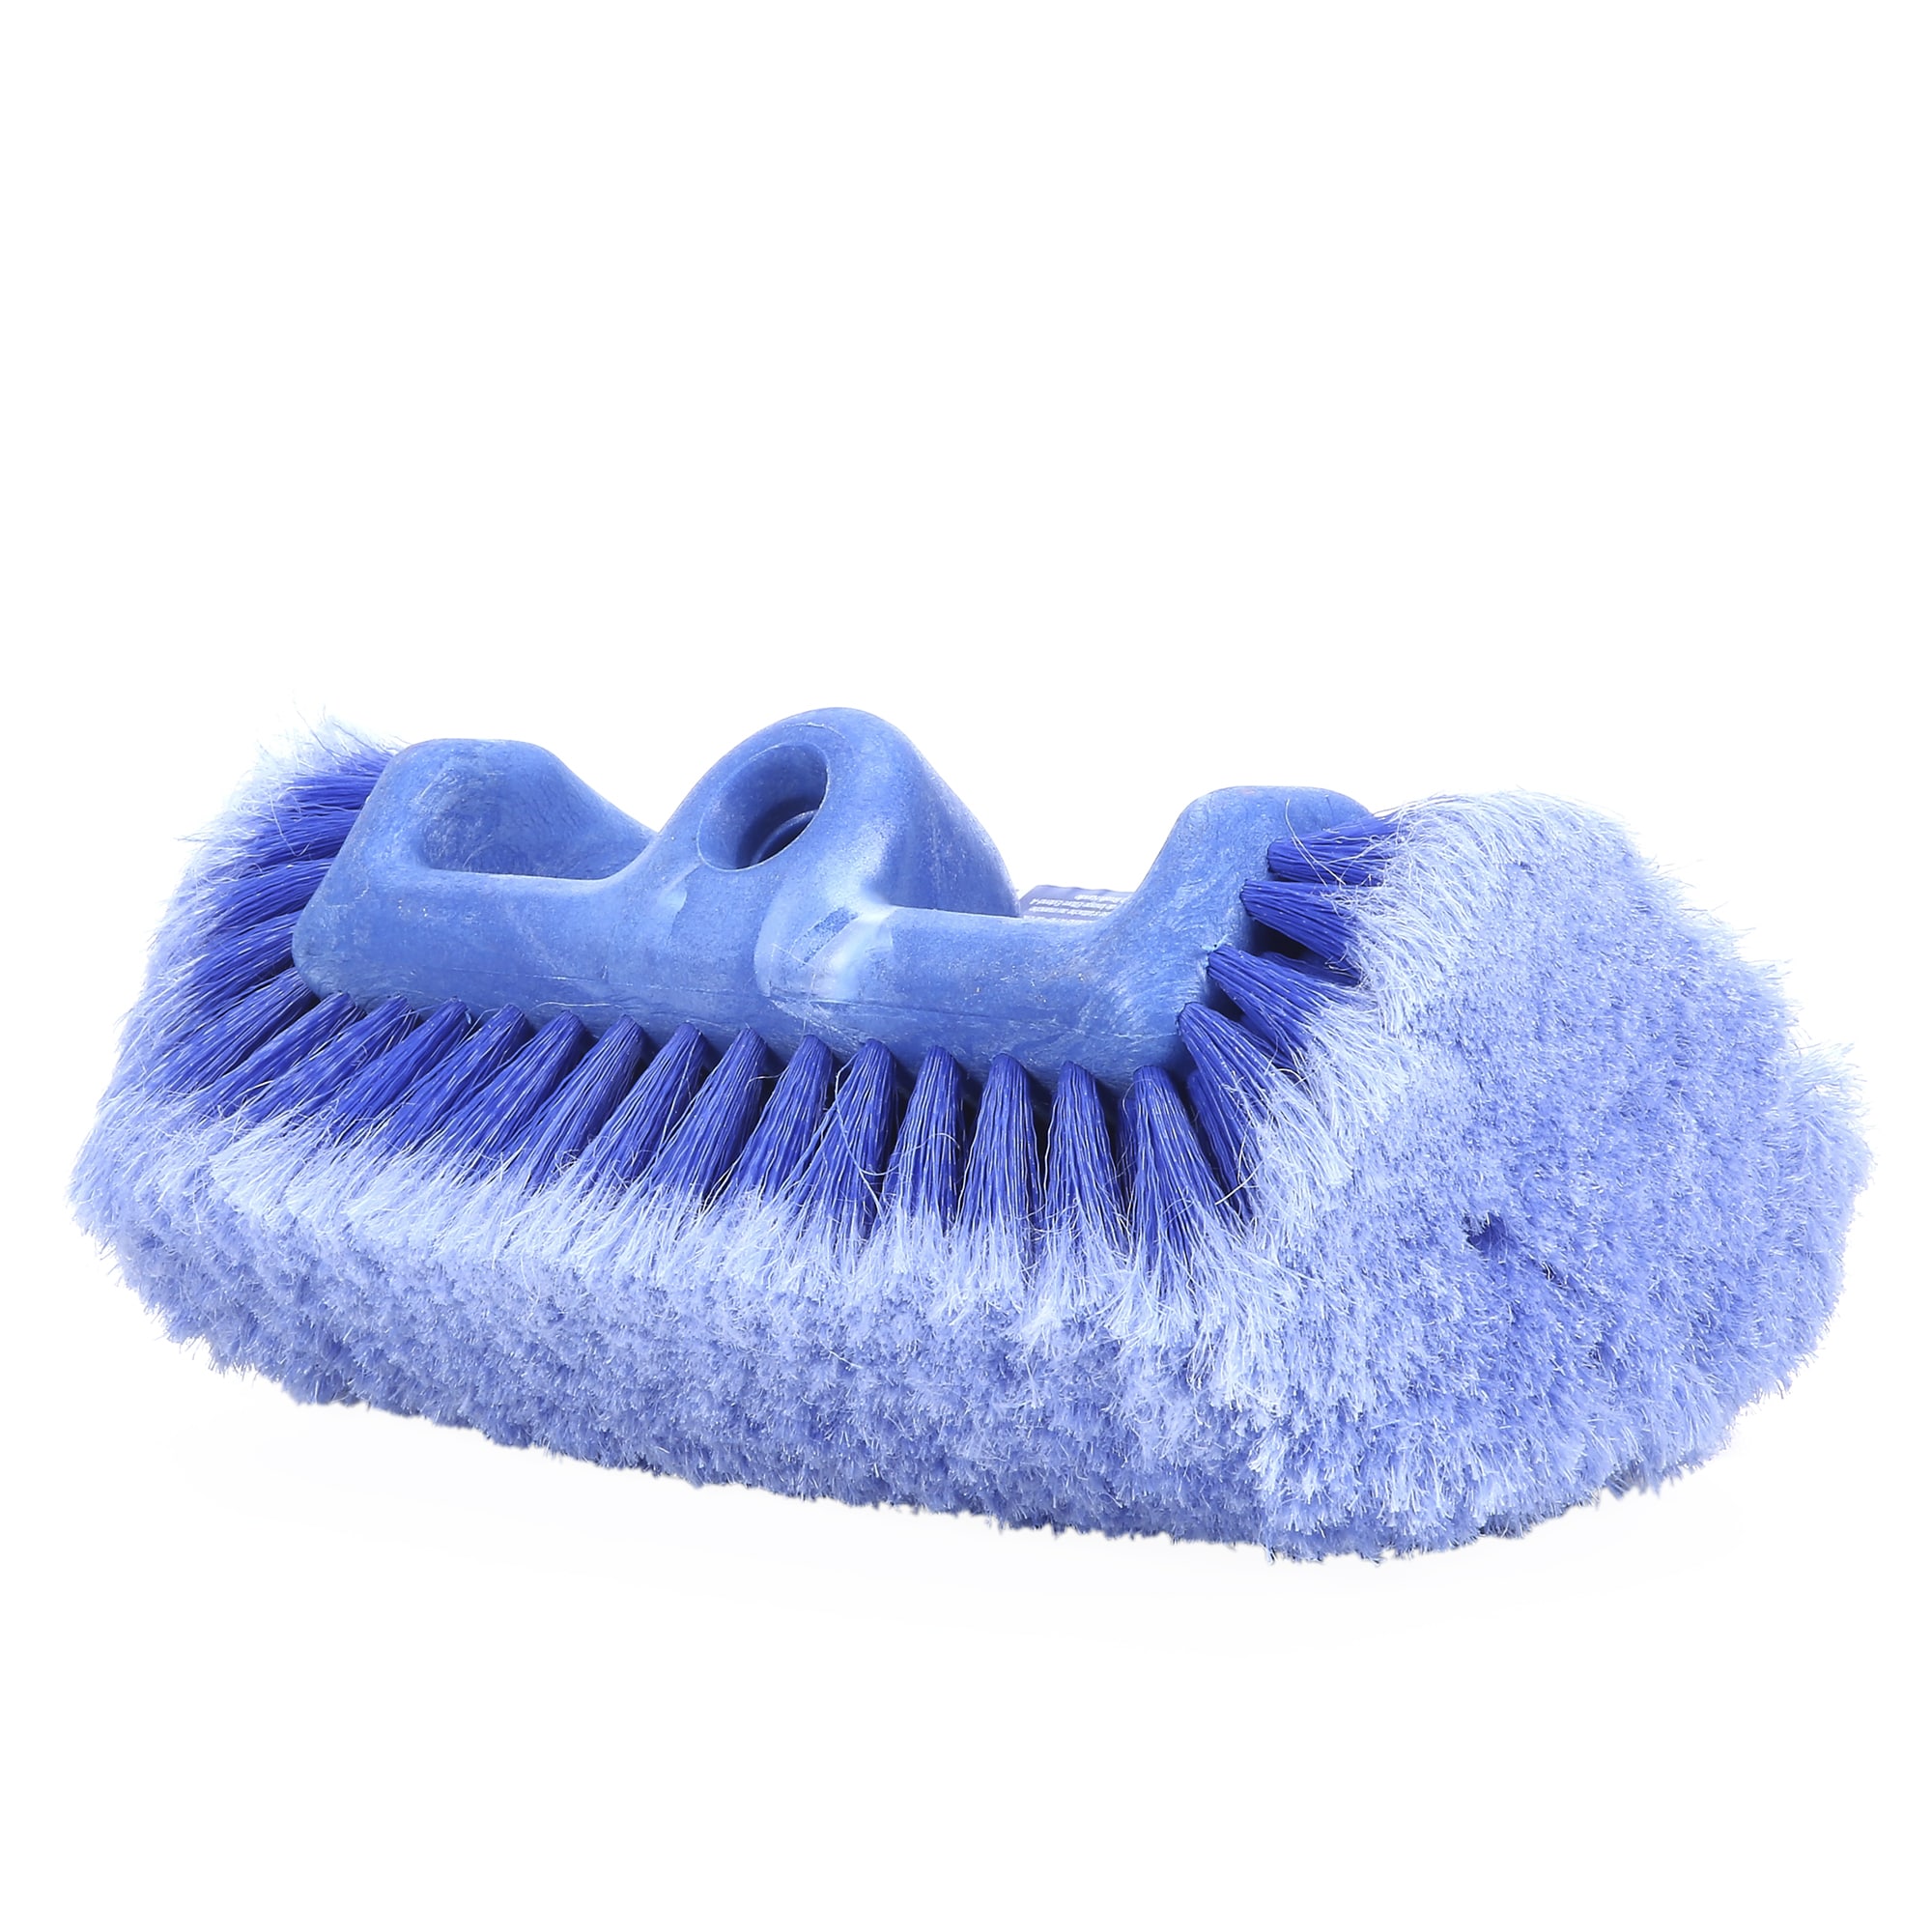 Soft Boat Cleaning Brush, Boat Care